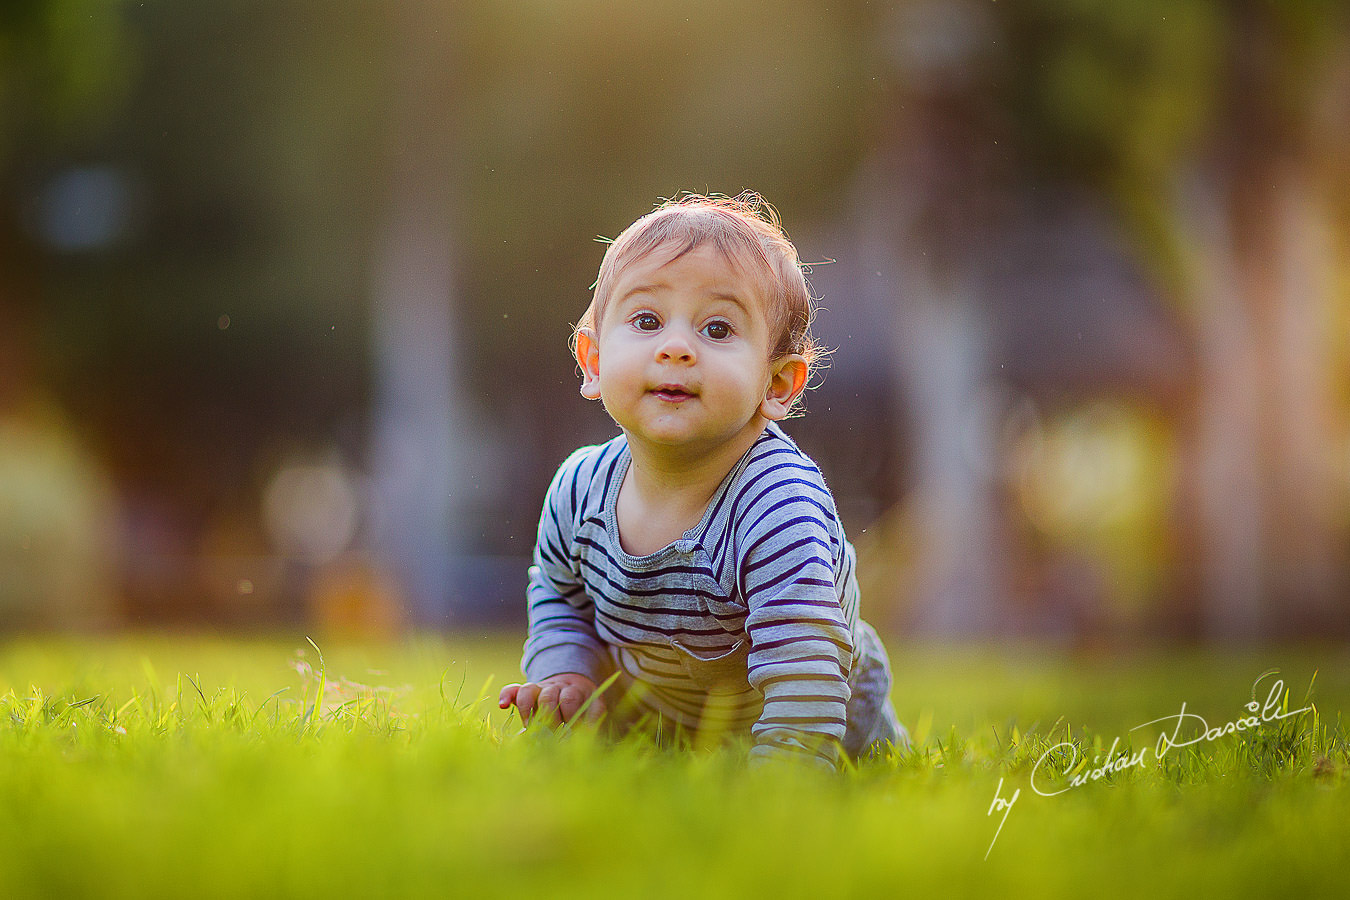 Little boy in the grass, moments captured by Cristian Dascalu during a beautiful Limassol family photography photo session.